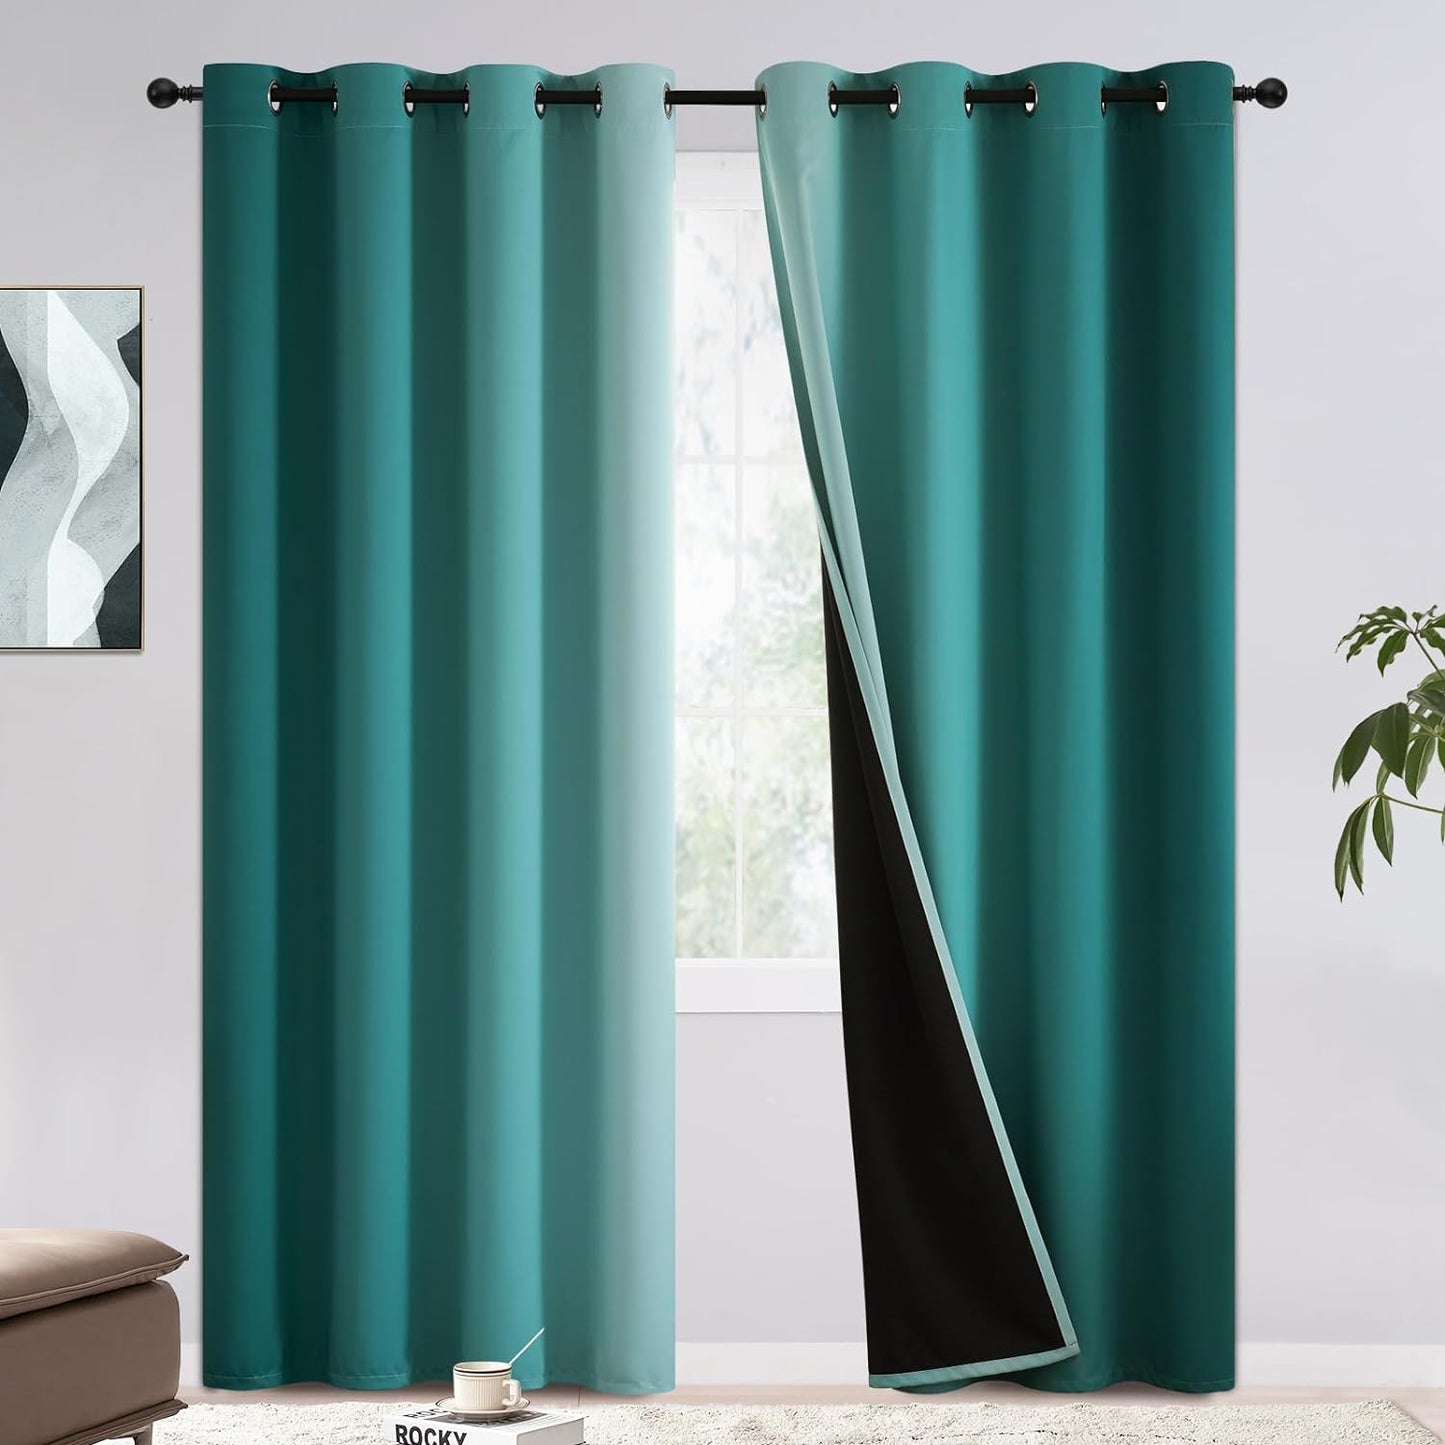 COSVIYA 100% Blackout Curtains & Drapes Ombre Purple Curtains 63 Inch Length 2 Panels,Full Room Darkening Grommet Gradient Insulated Thermal Window Curtains for Bedroom/Living Room,52X63 Inches  COSVIYA Teal To Greyish White 52W X 84L 